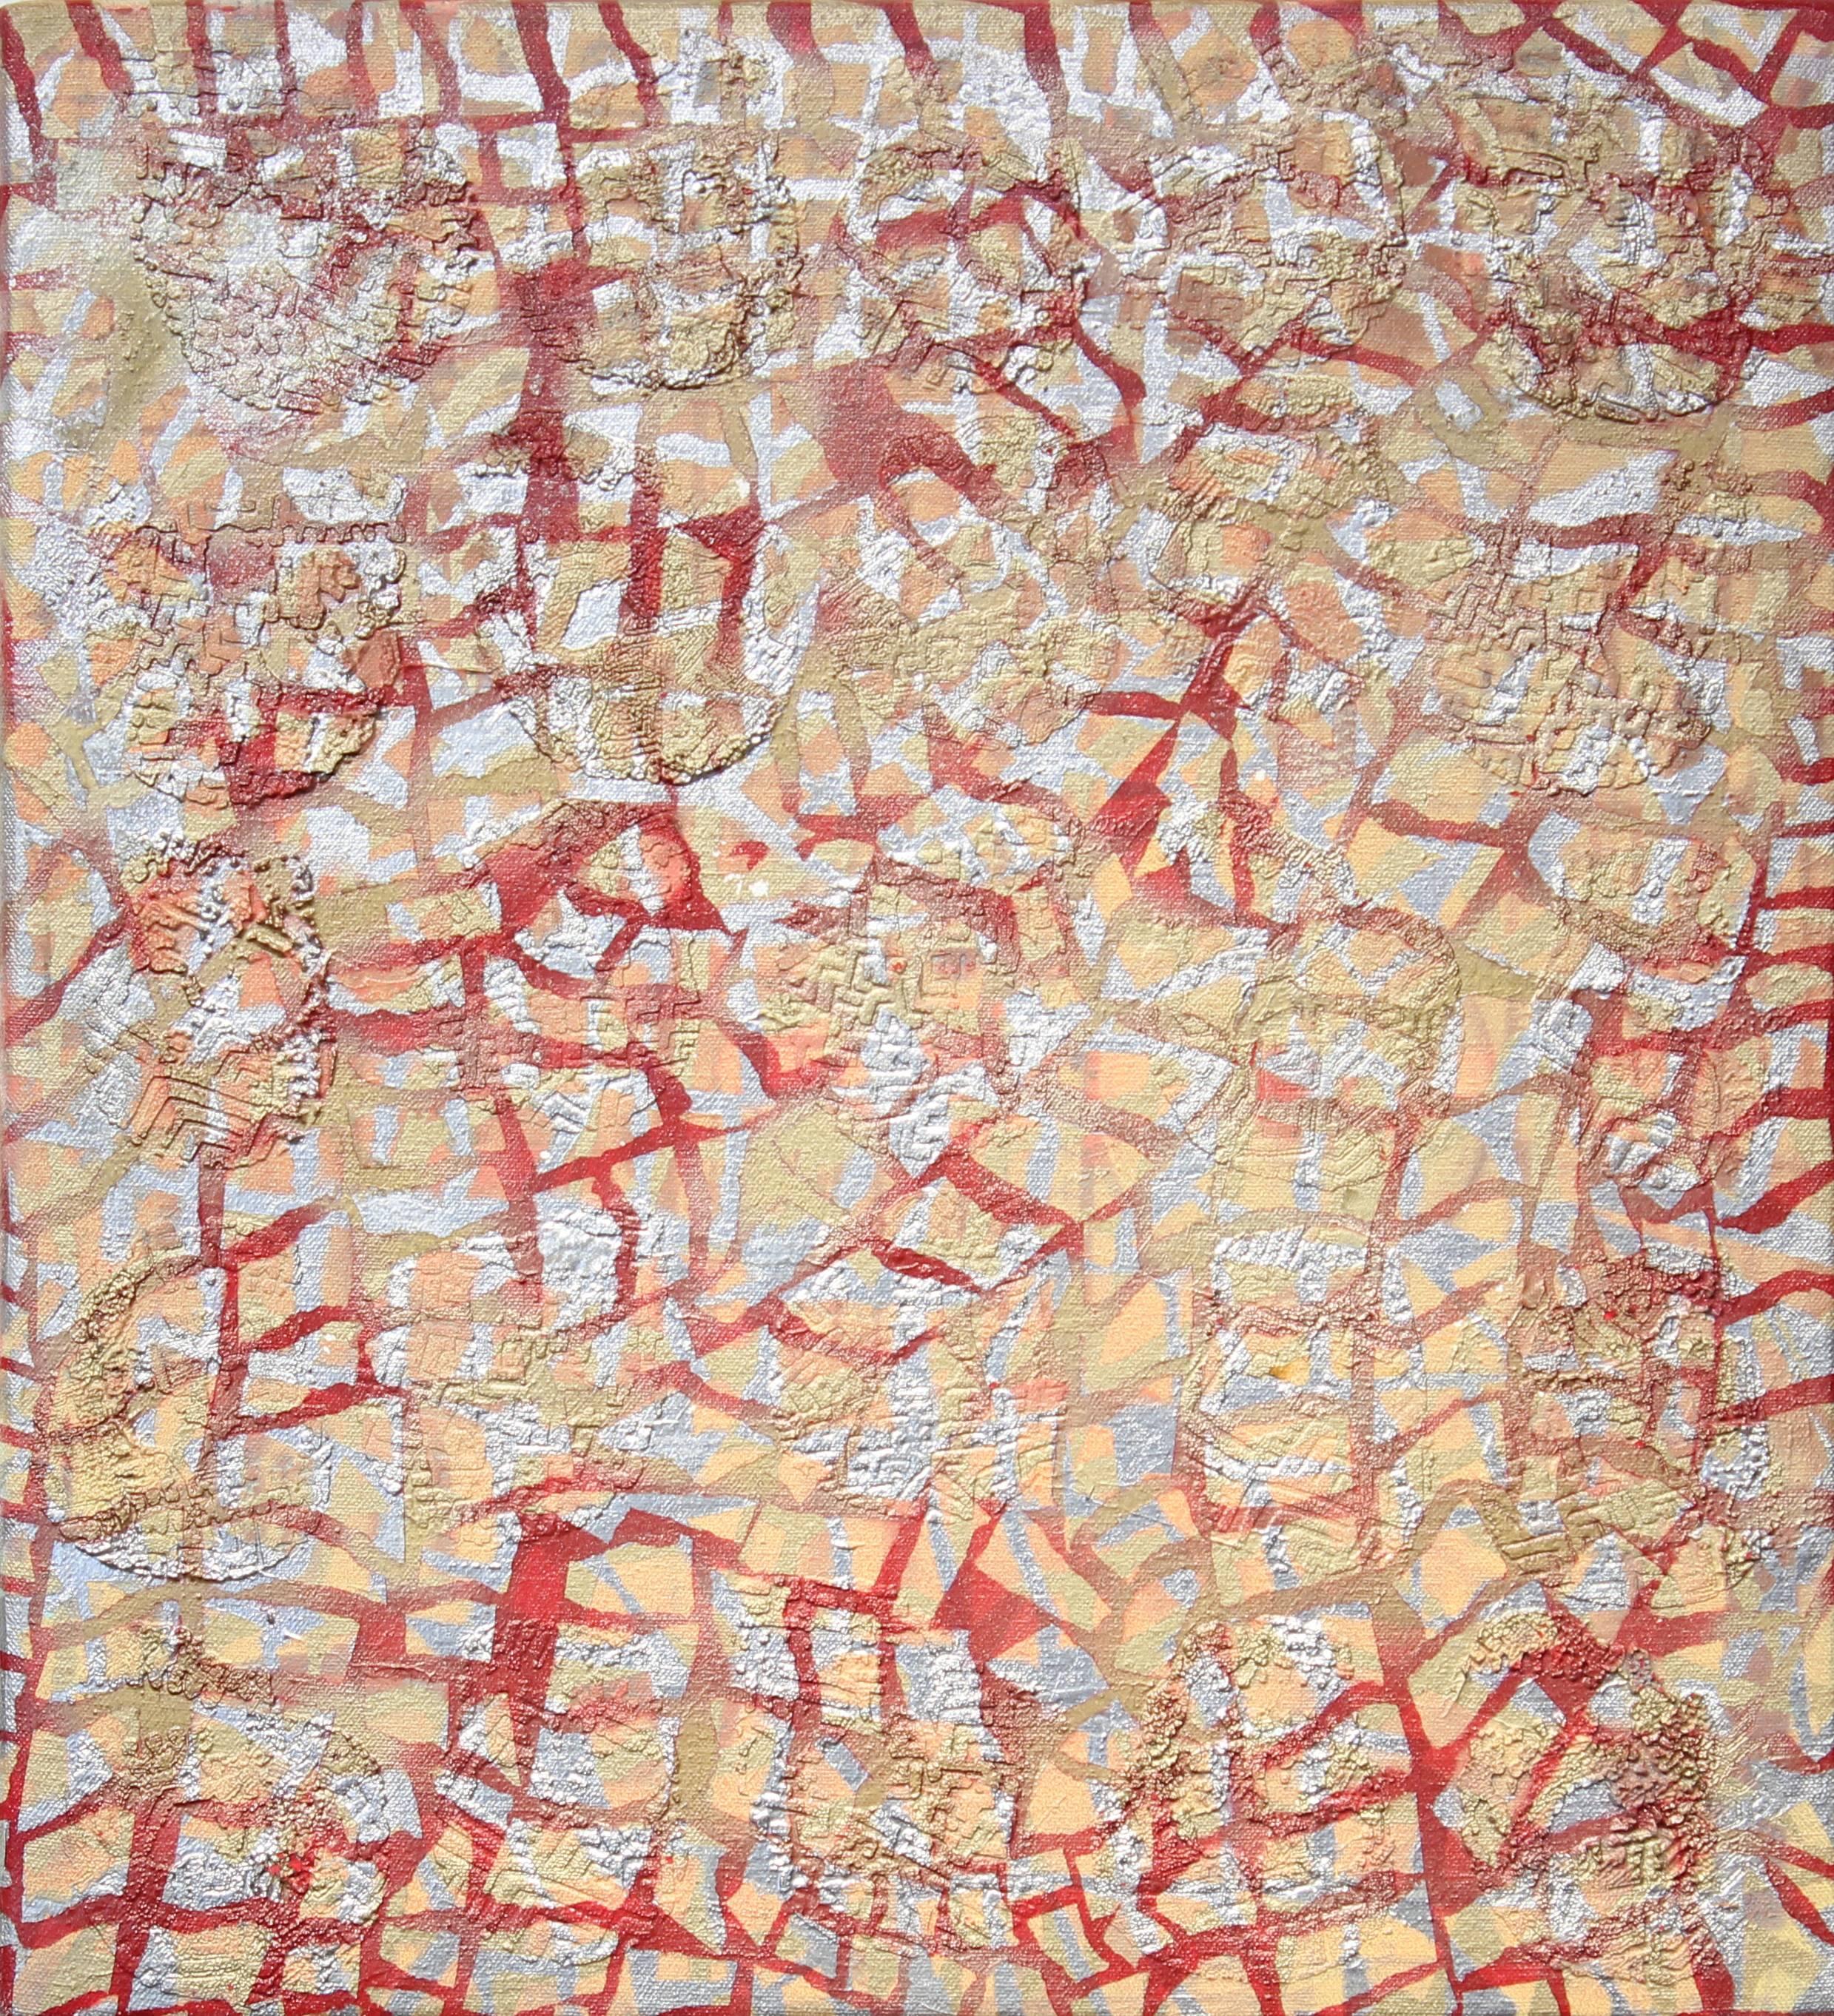 Red, Silver and Gold Relief Textured Abstract